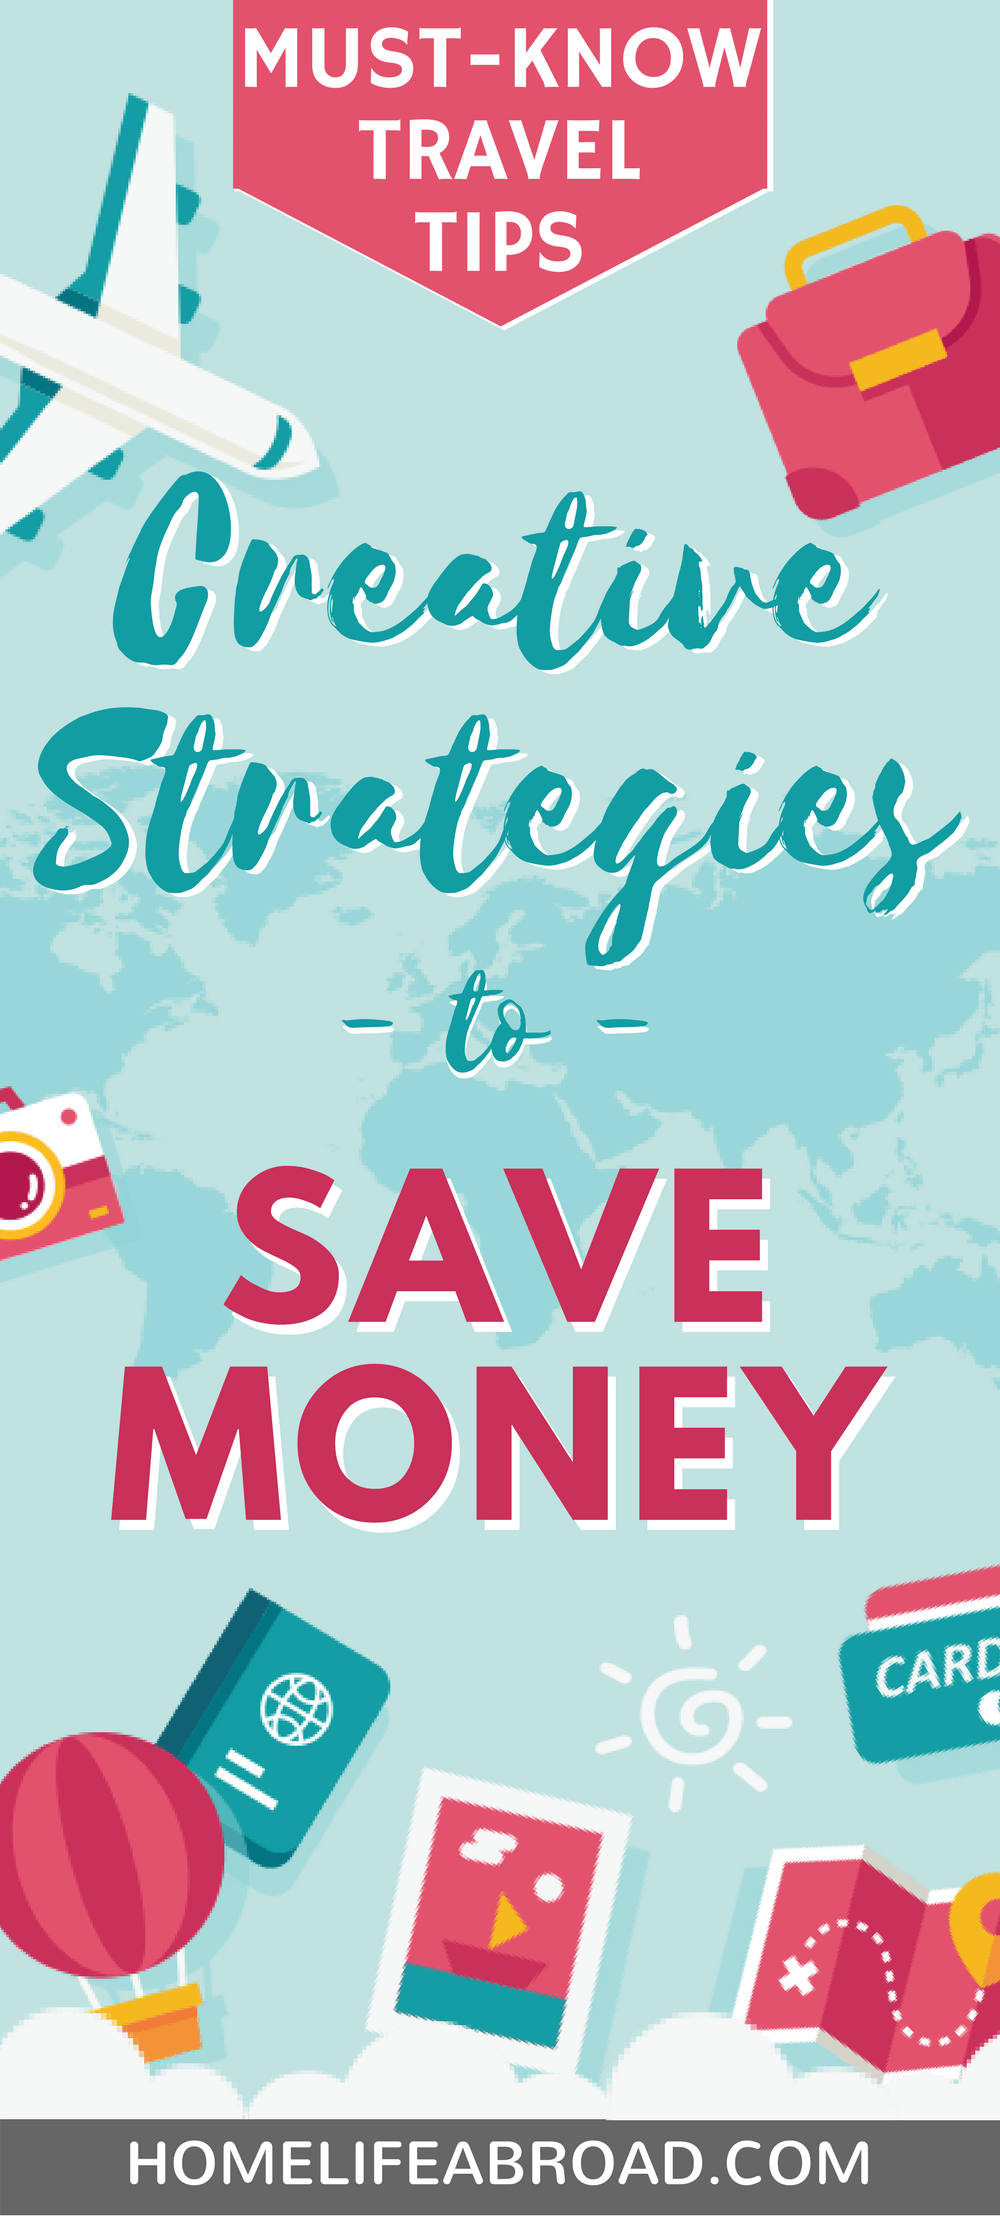 Tired of the same old travel tips? These 5 out-of-the-box strategies will help you save money in unique ways! (Plus, a $41 Airbnb discount code included!) #travelsavings #savemoney #budgettravel #traveltips